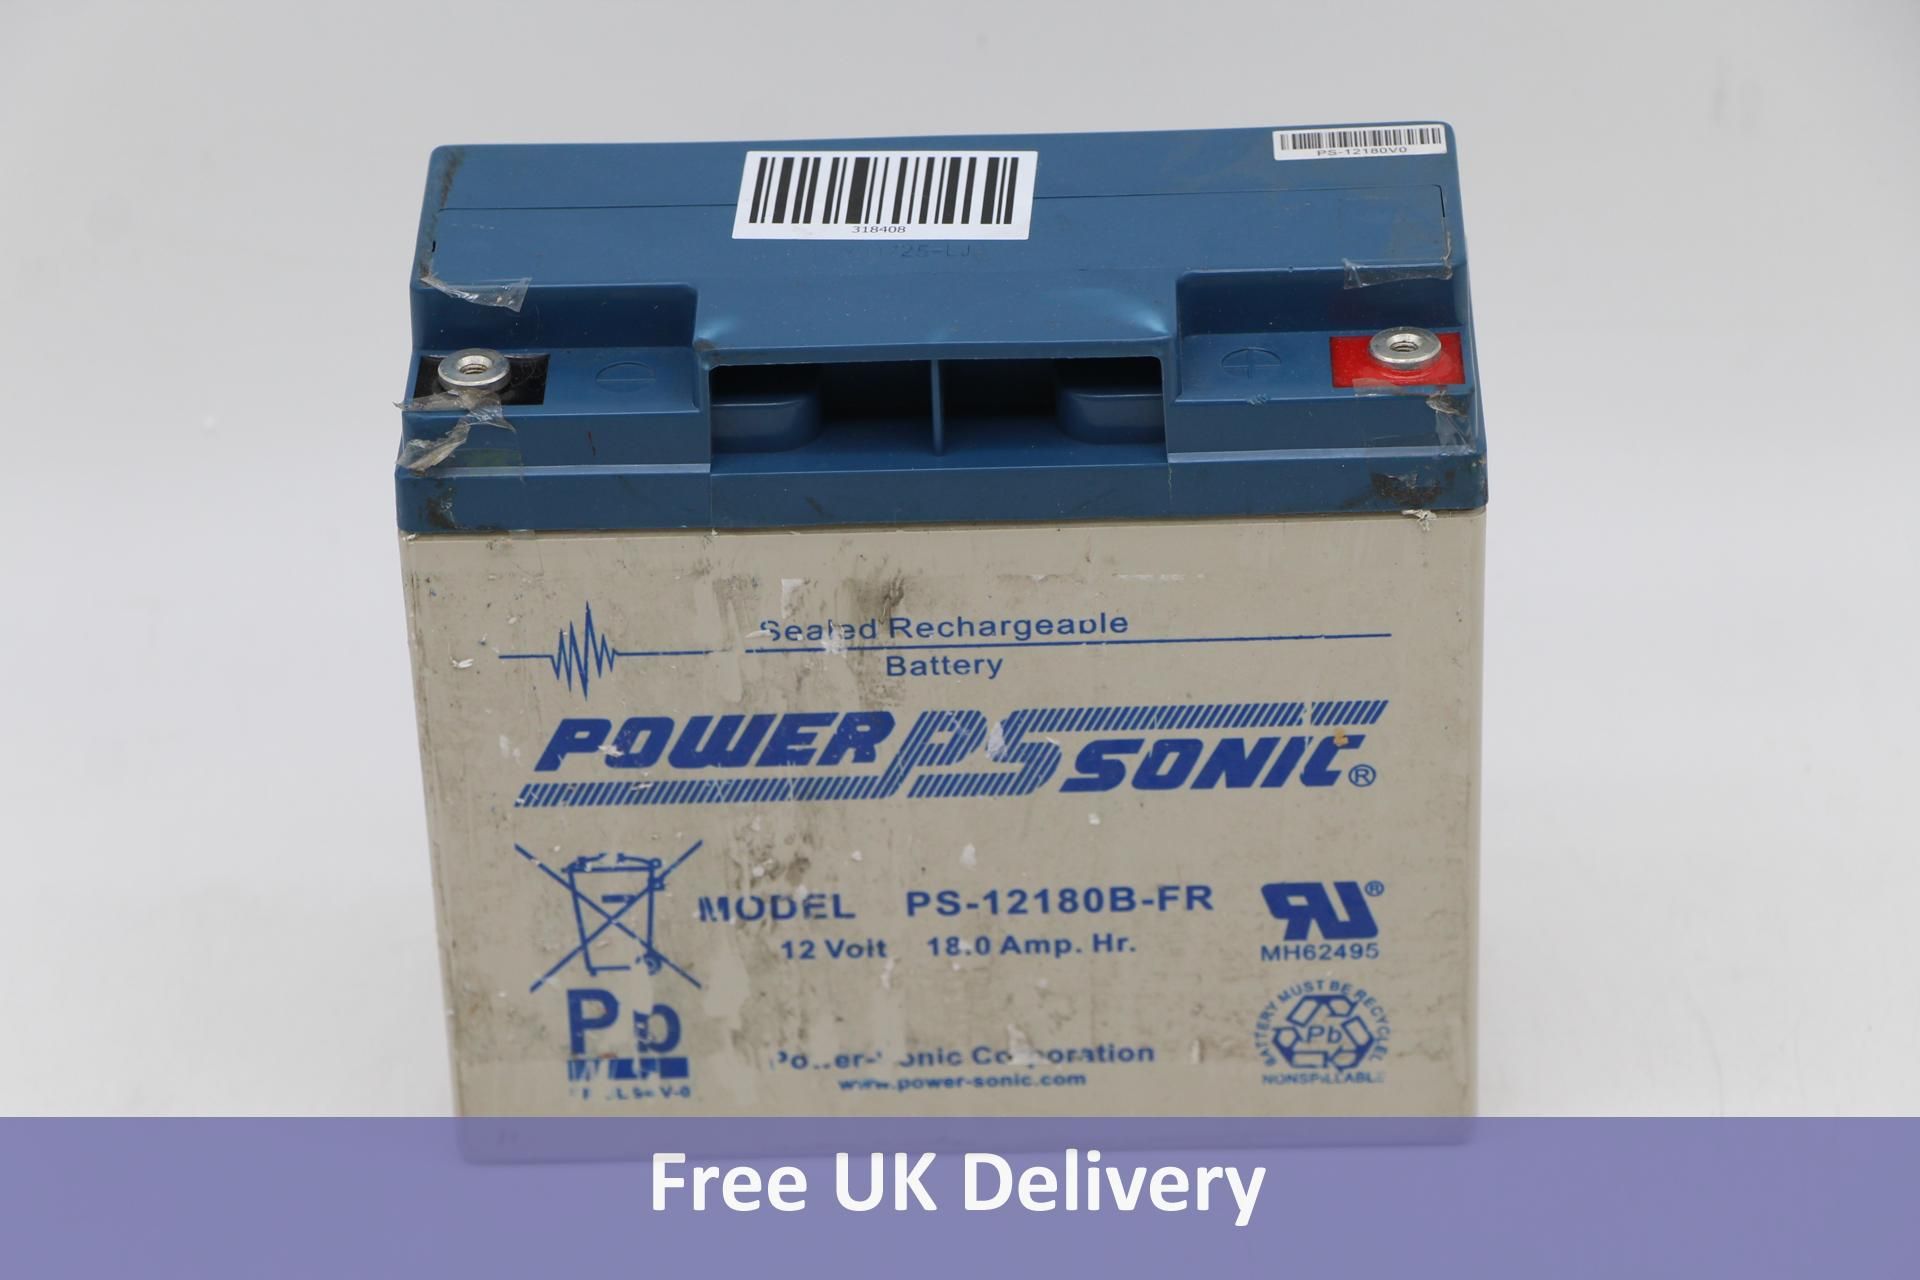 Power PS Sonic Sealed Rechargeable Battery, PS-12180S FR, 12V 18Ah Used